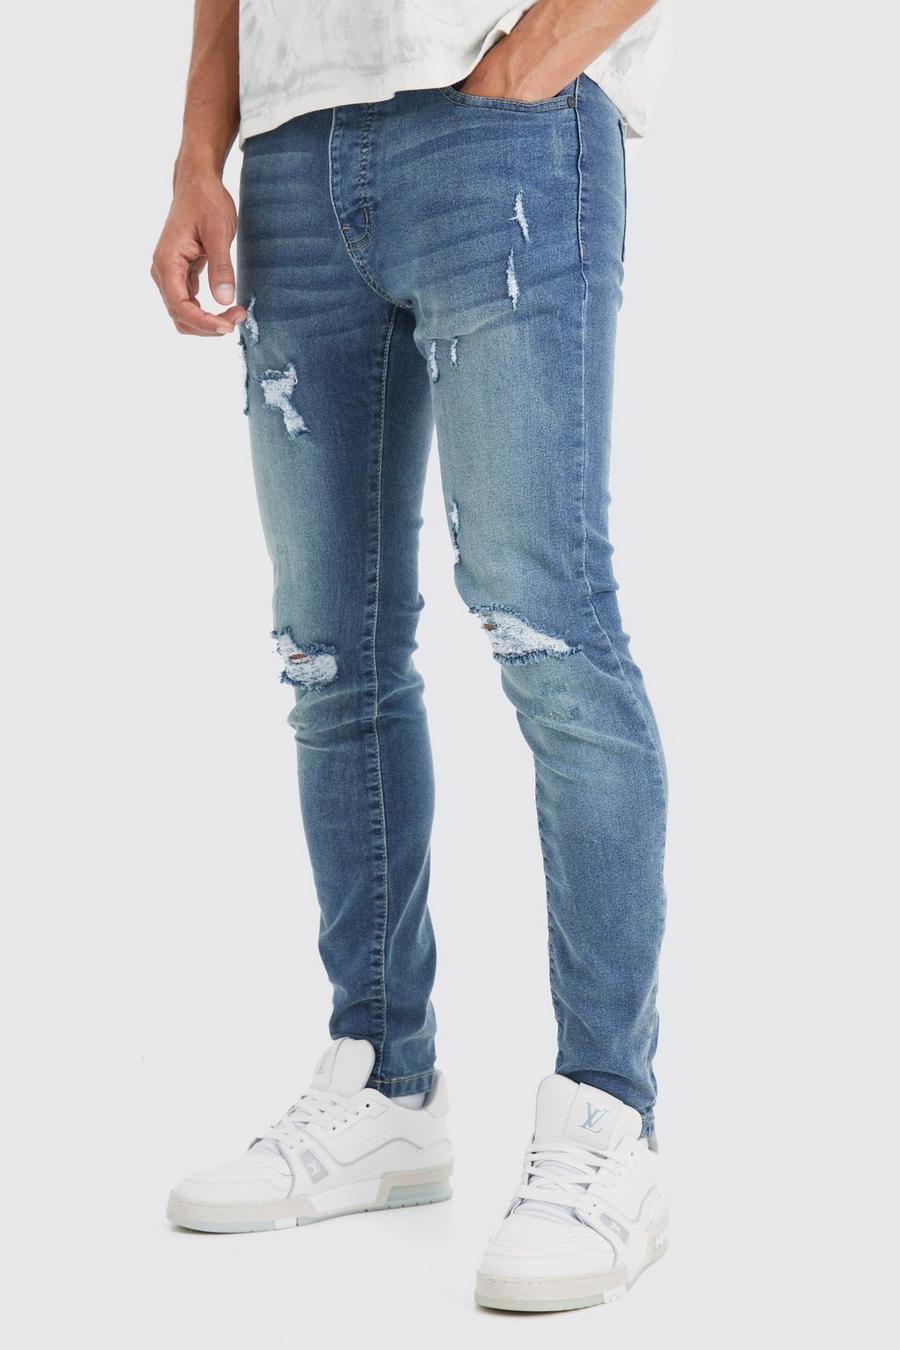 Jeans Skinny Fit Stretch con strappi estremi sul ginocchio, Vintage blue image number 1